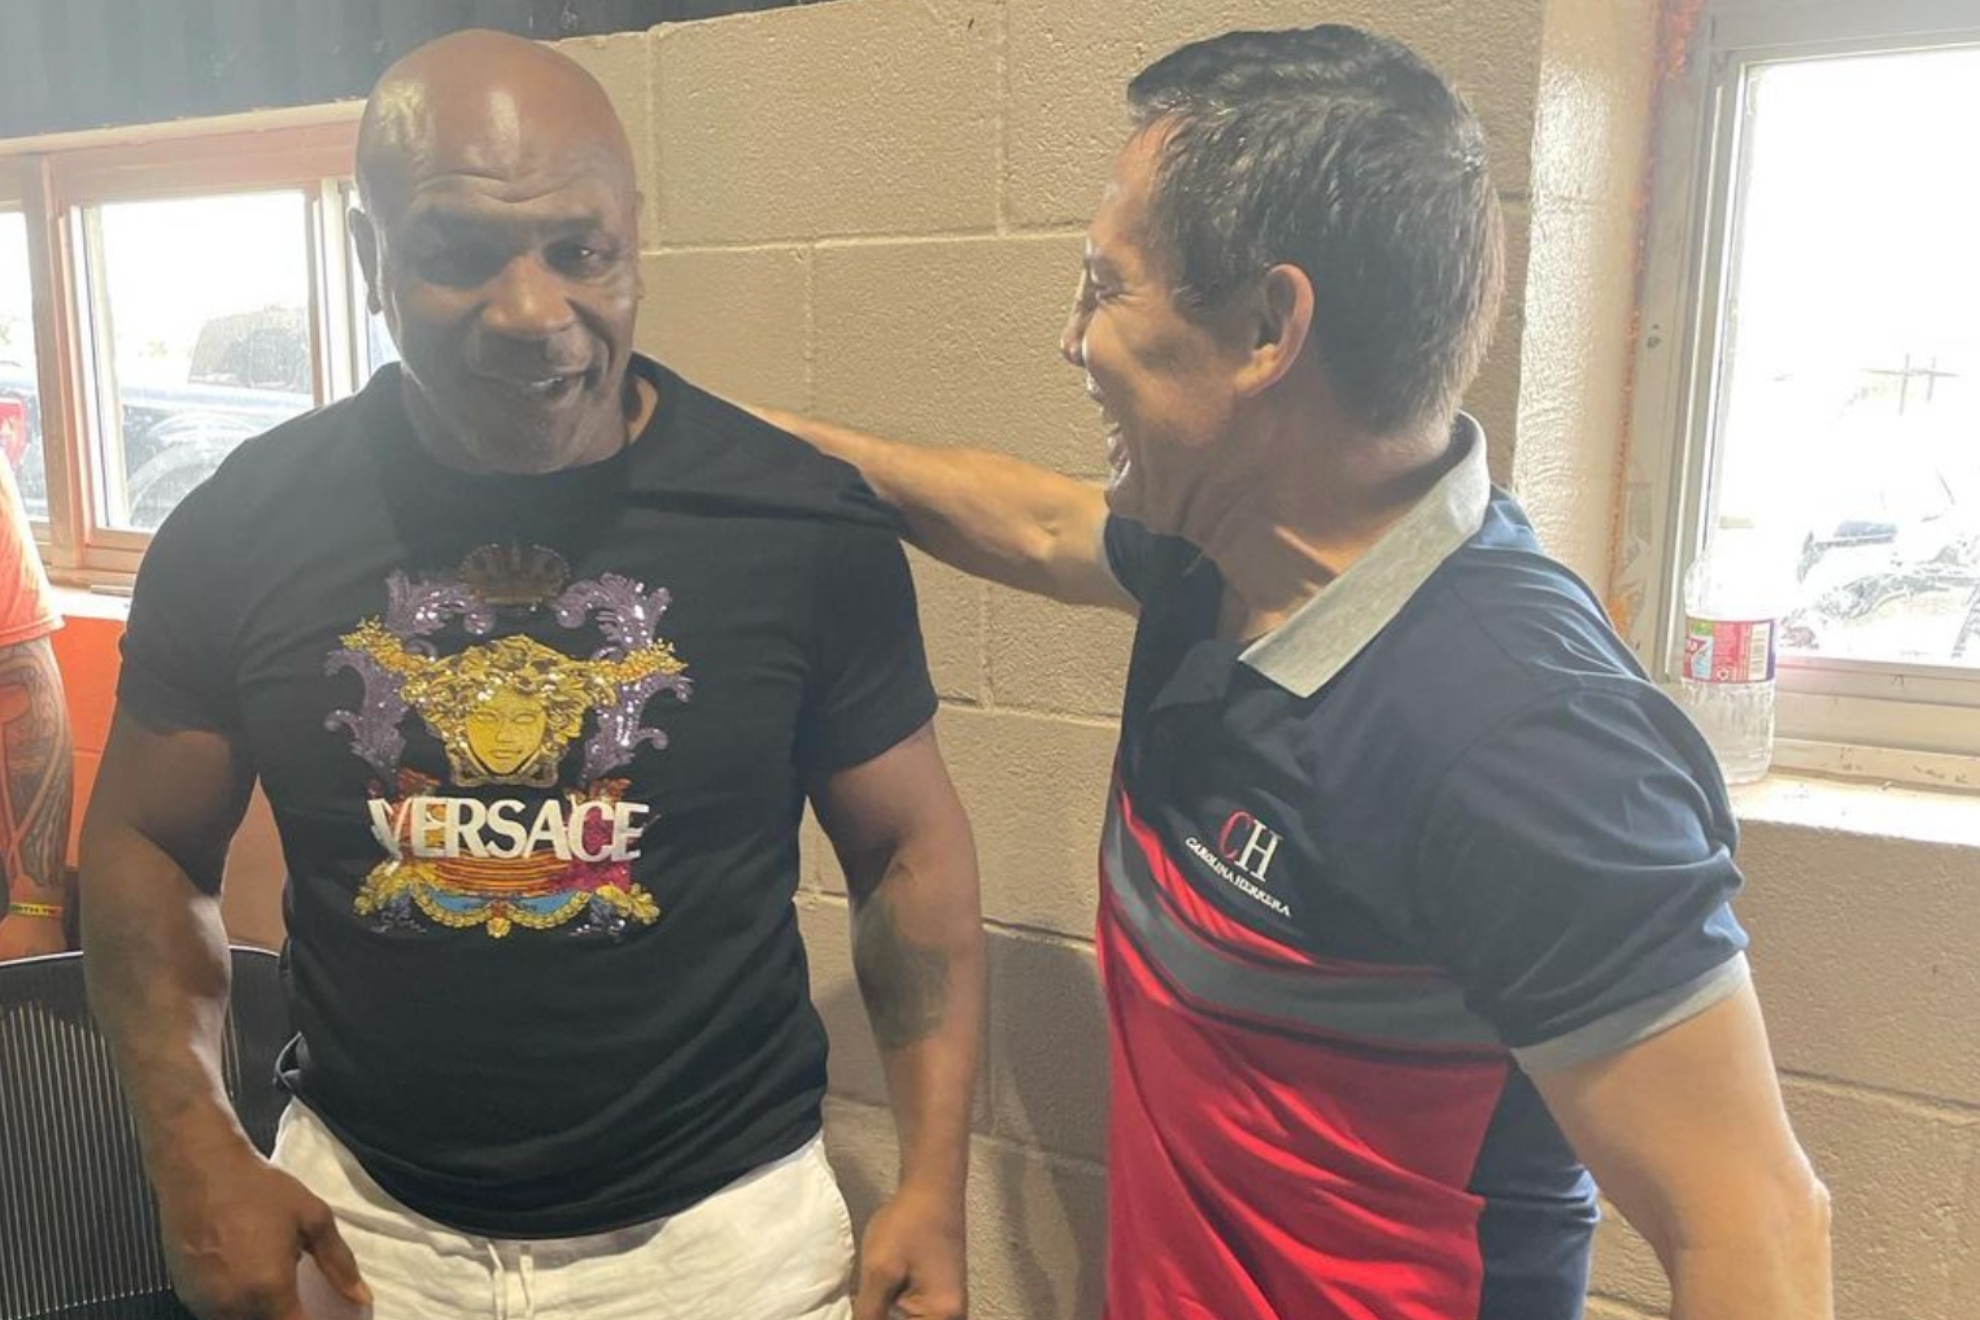 Image of Mike Tyson and Julio Cesar Chavez hanging out.